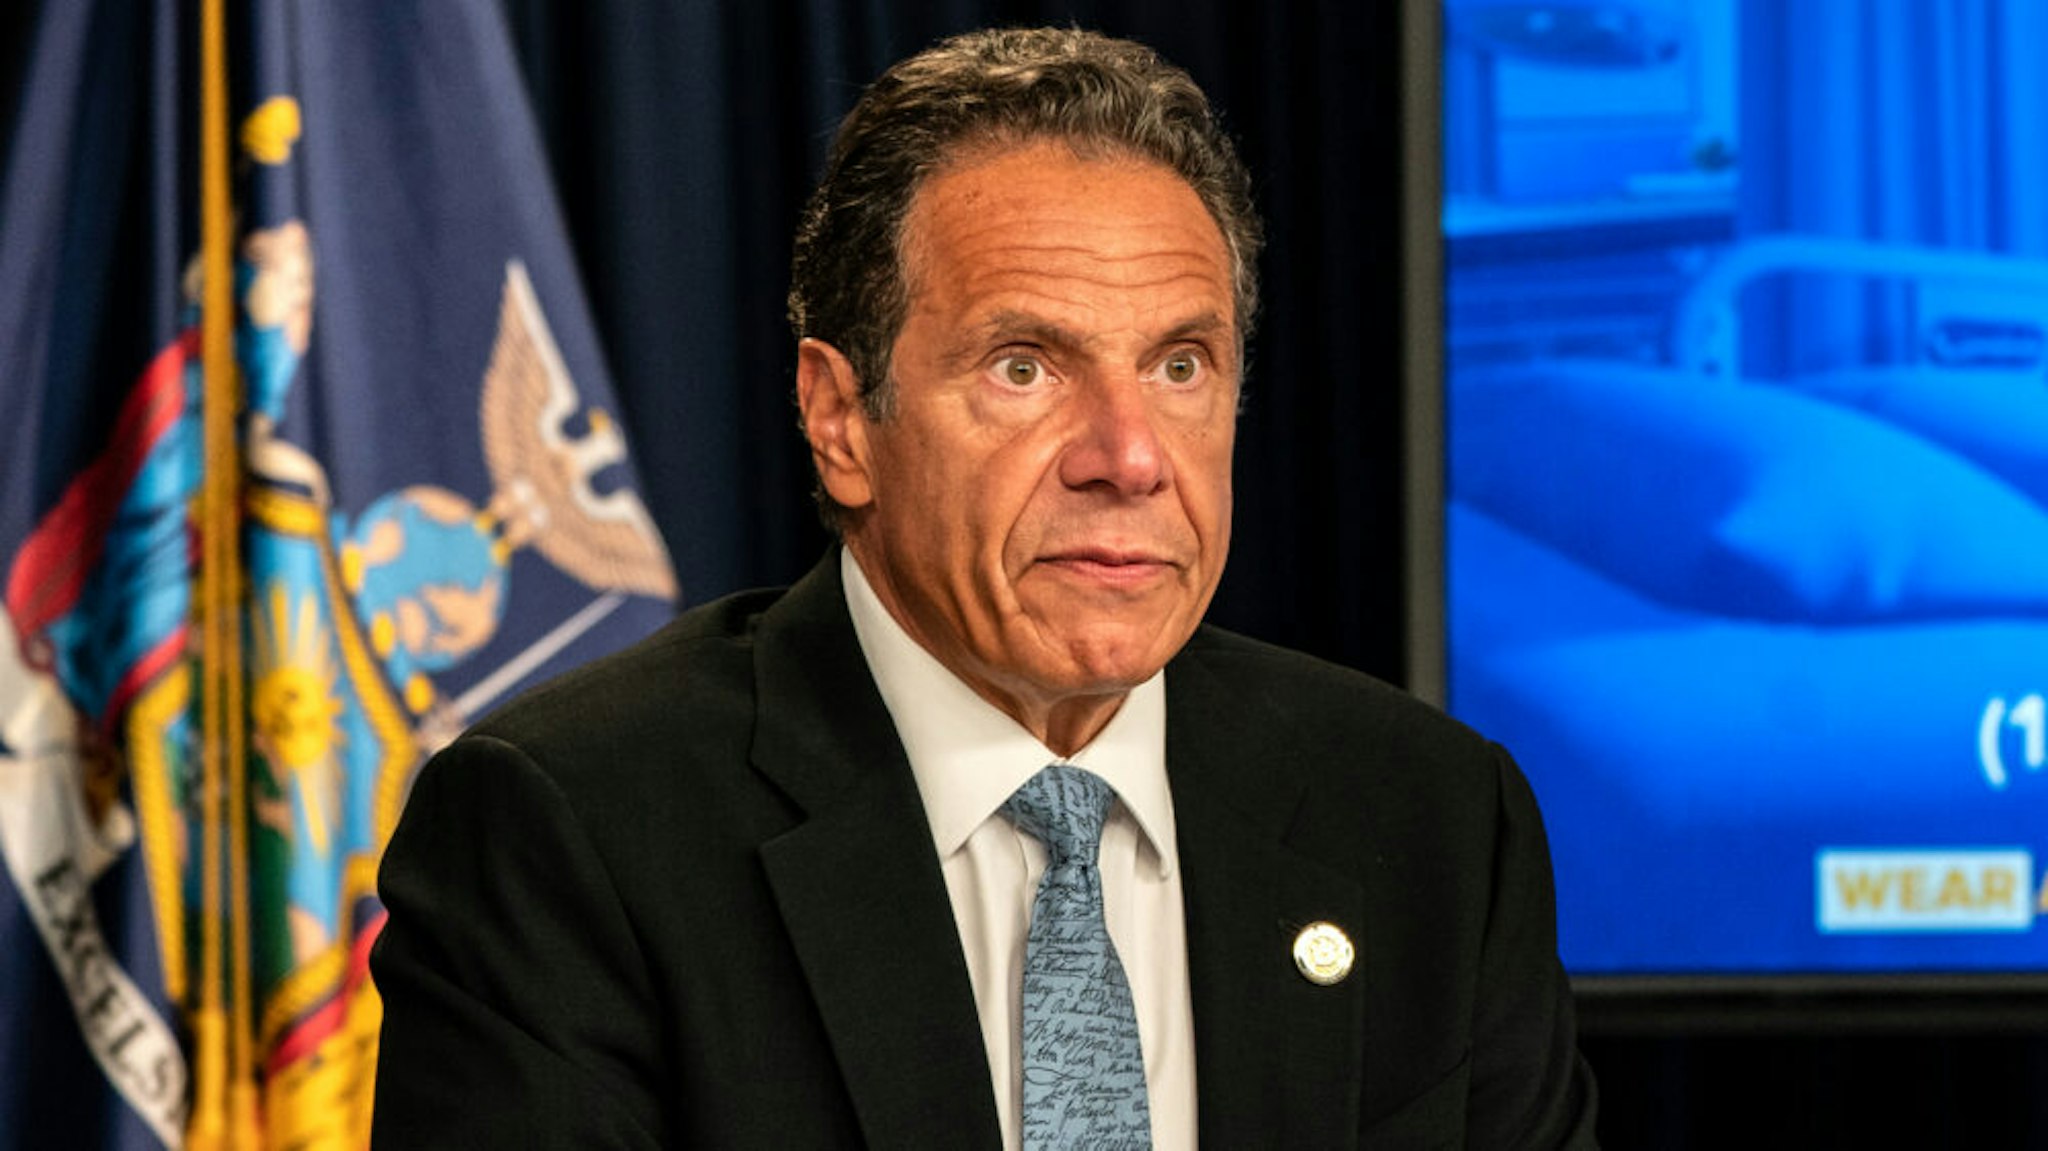 Andrew Cuomo speaks during the daily media briefing at the Office of the Governor of the State of New York on July 23, 2020 in New York City. The Governor said the state liquor authority has suspended 27 bar and restaurant alcohol licenses for violations of social distancing rules as public officials try to keep the coronavirus outbreak under control.